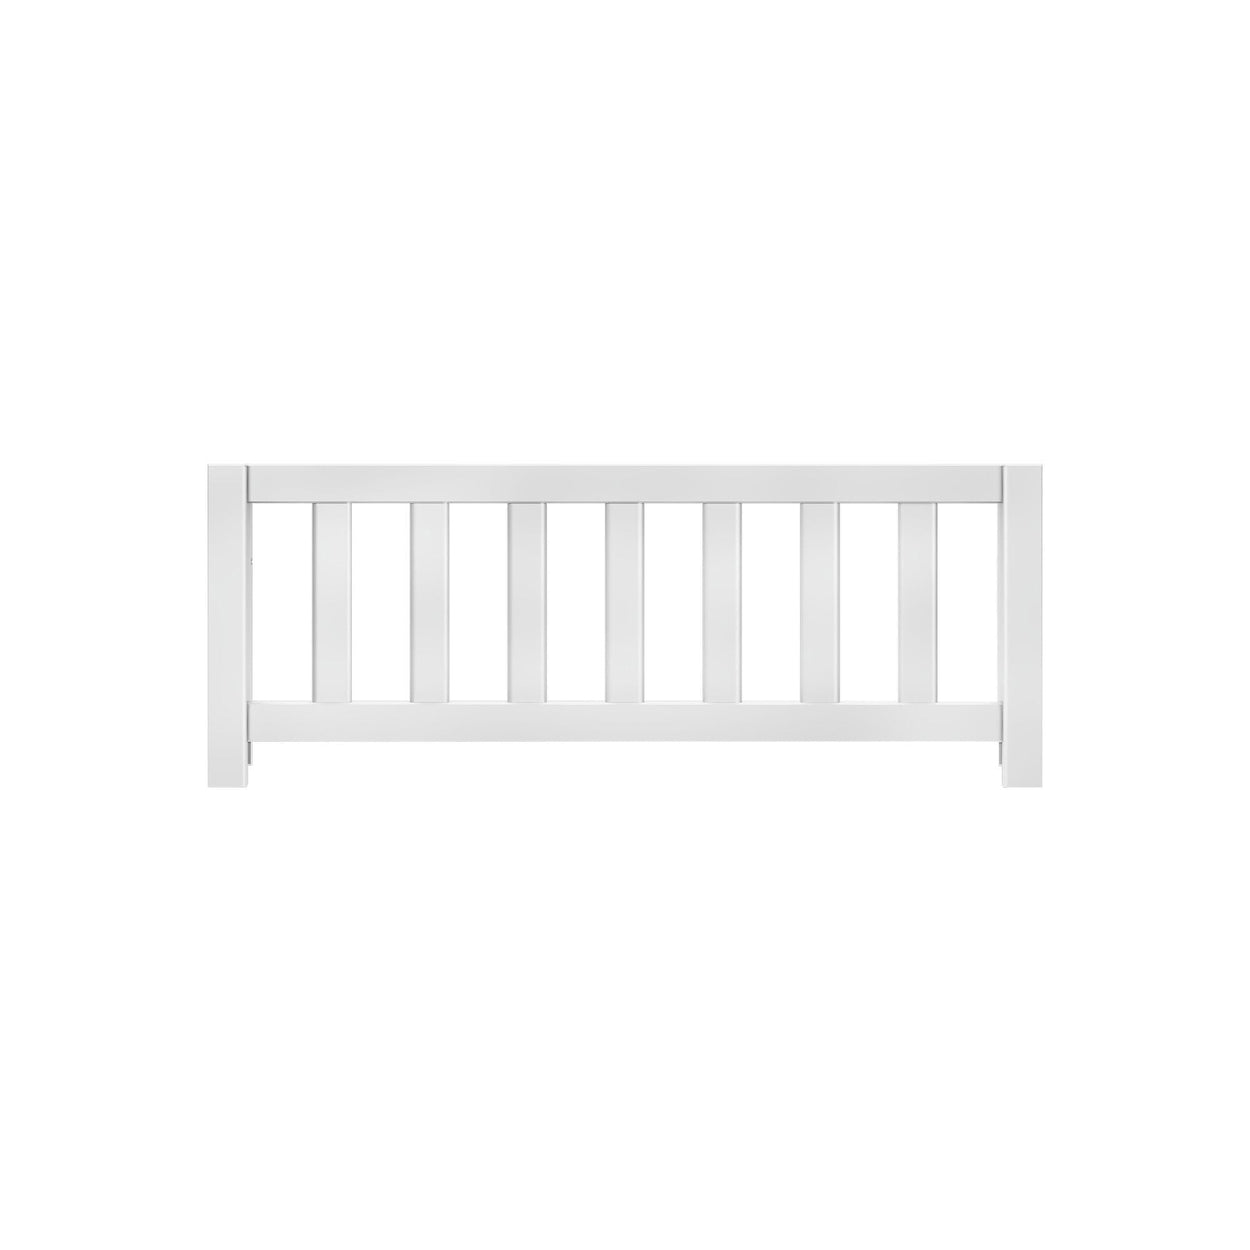 177209-002 : Component Safety Guard Rail, White